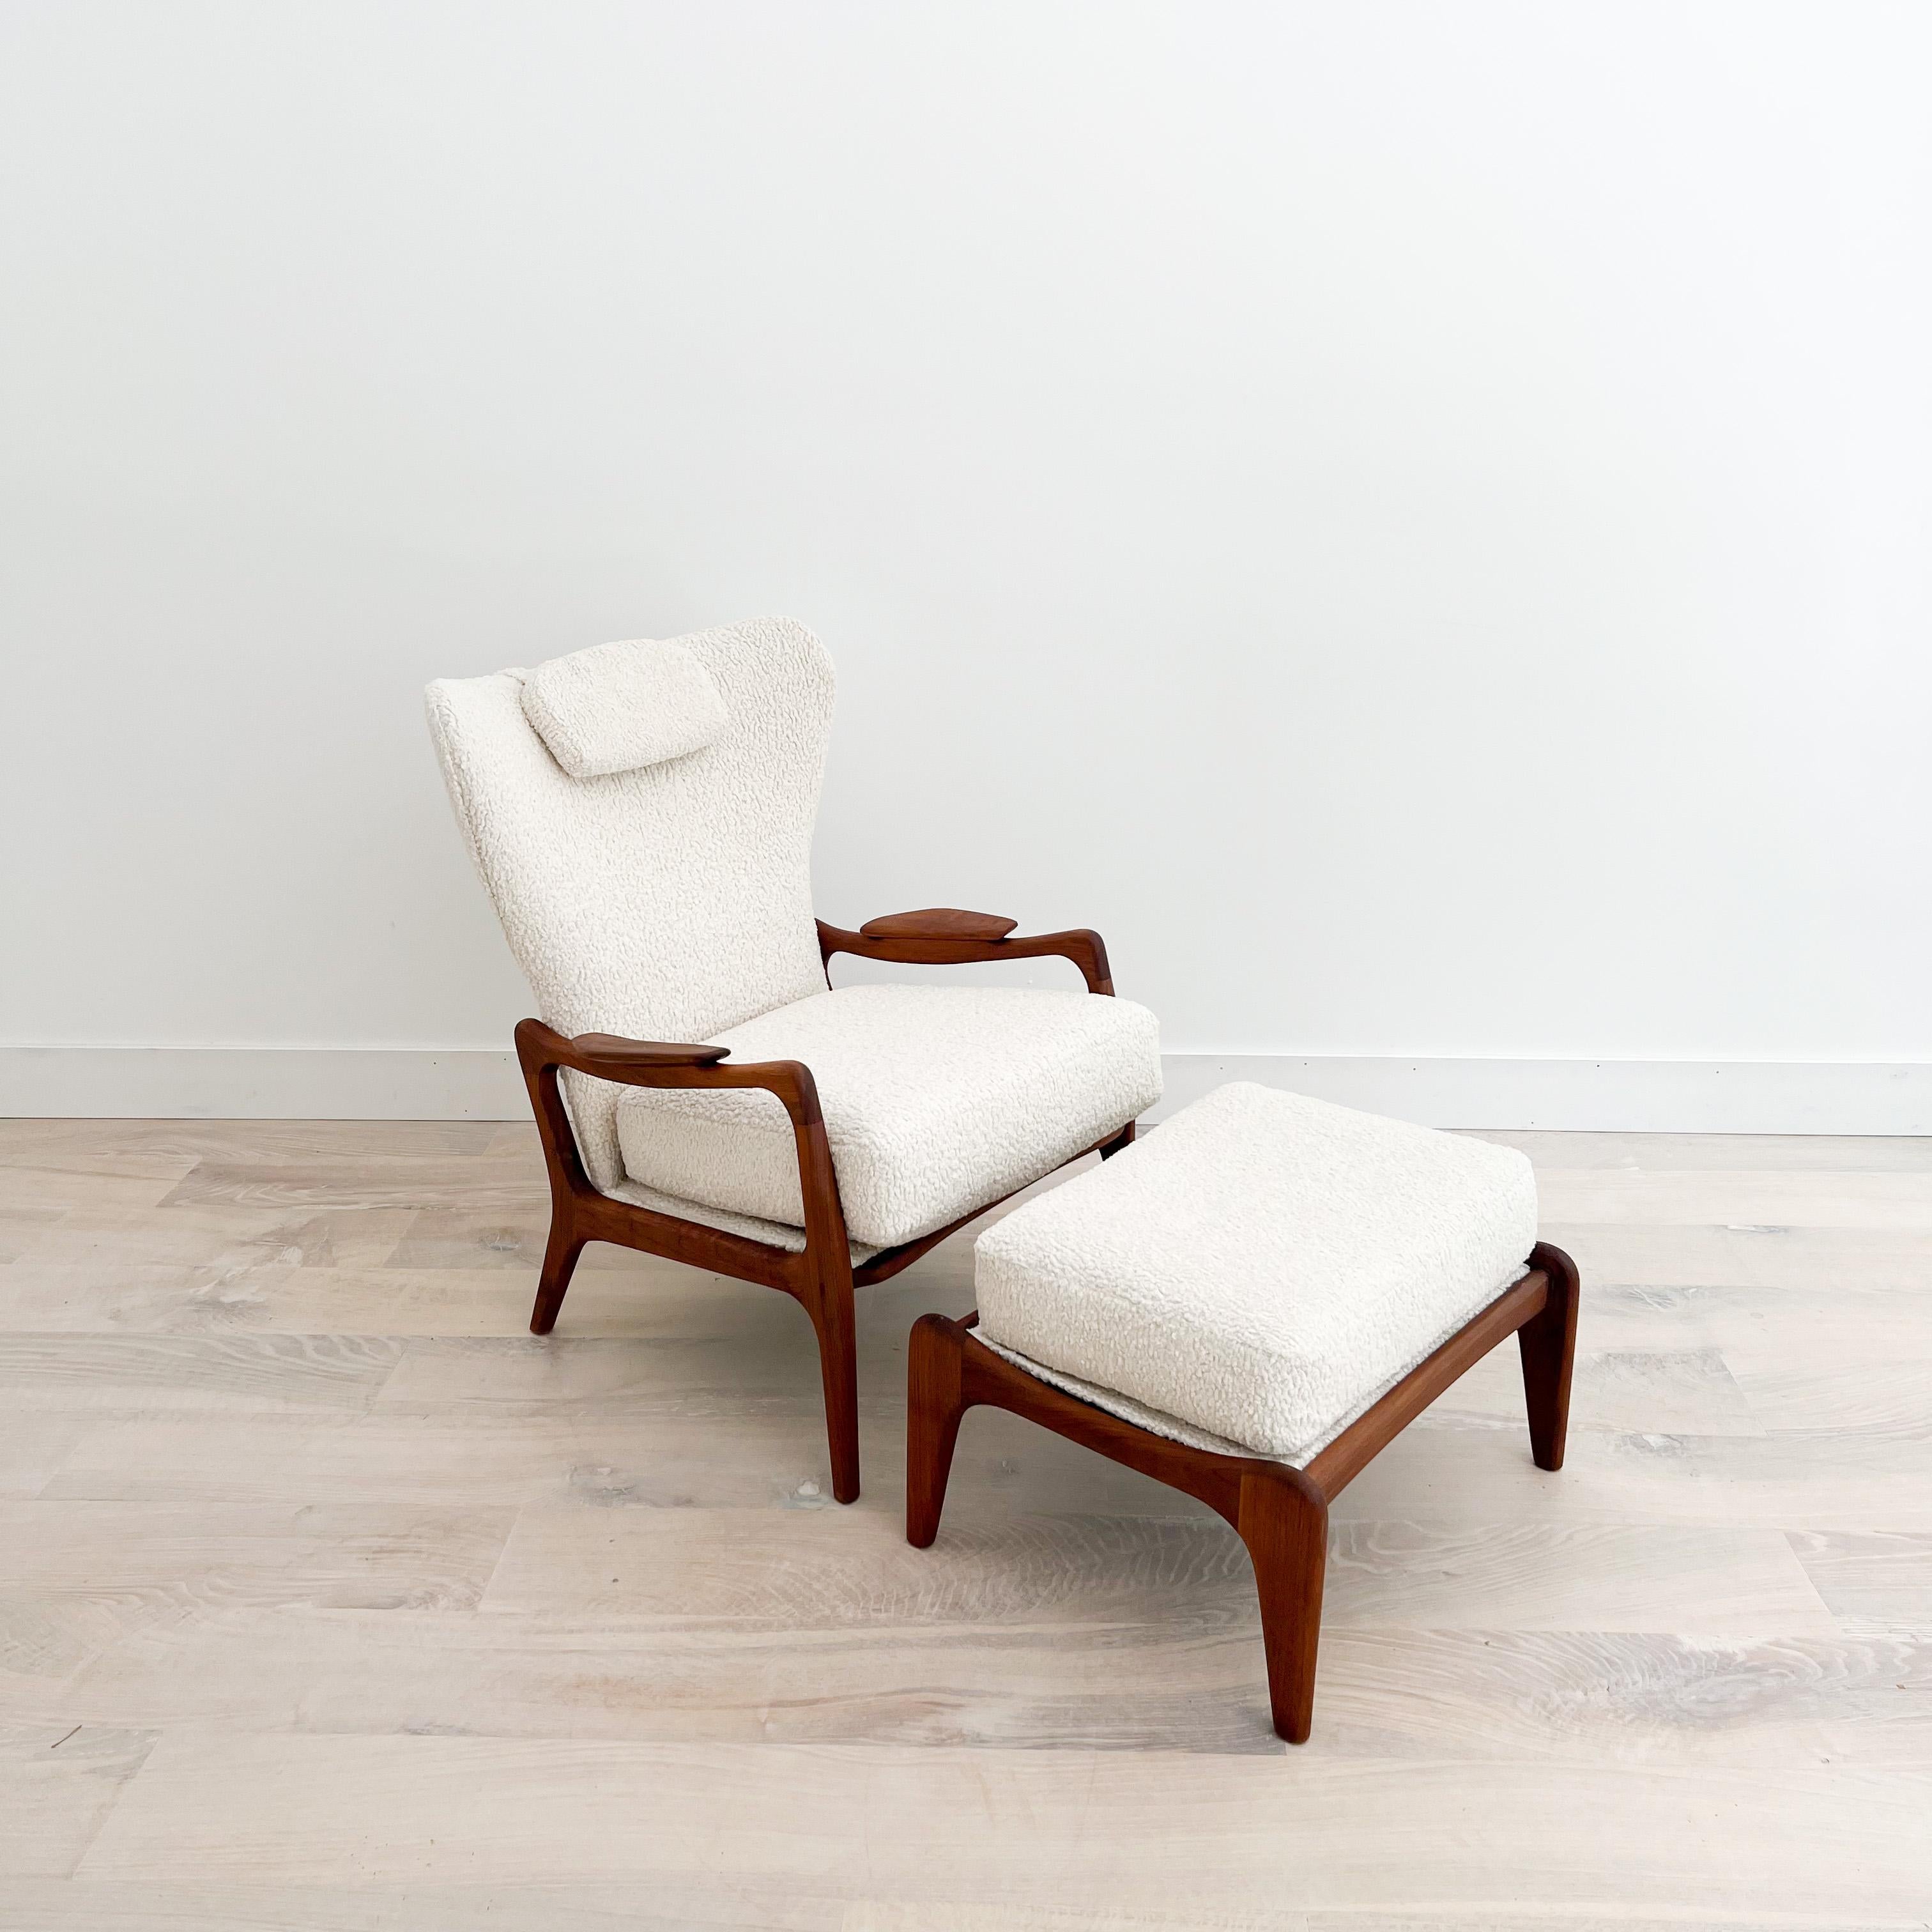 Mid century modern sculpted walnut wingback lounge chair and ottoman designed by Adrian Pearsall. All new professional nylon webbing and white shearling upholstery that is super soft to the touch. The headrest pillow can be pulled back if not